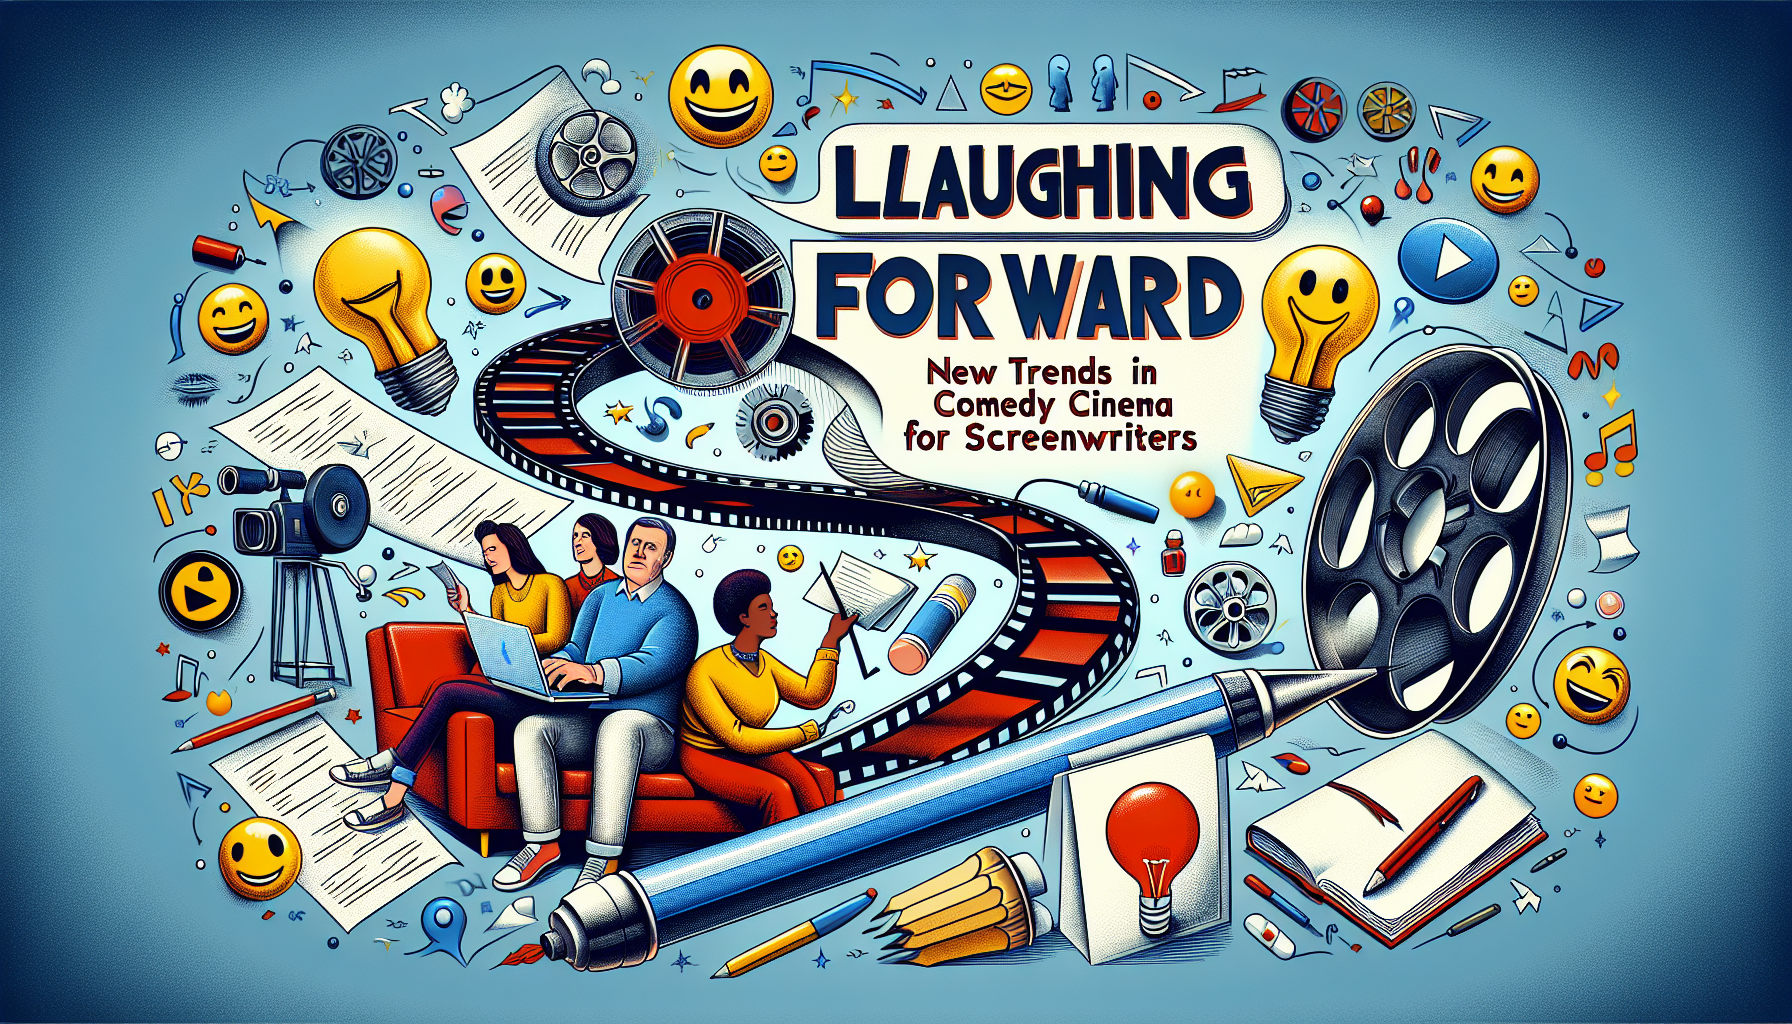 A conceptual illustration symbolizing the phrase 'Laughing Forward: New Trends in Comedy Cinema for Screenwriters.' Please focus on modern and vibrant colors. The image may include elements such as a cinema reel, a pen, a light bulb, and emoticons to represent comedy and writing. People are not required in the image, but if included they should be racially and gender diverse. The narrative should be forward-looking and upbeat, in line with current trends in comedy cinema.